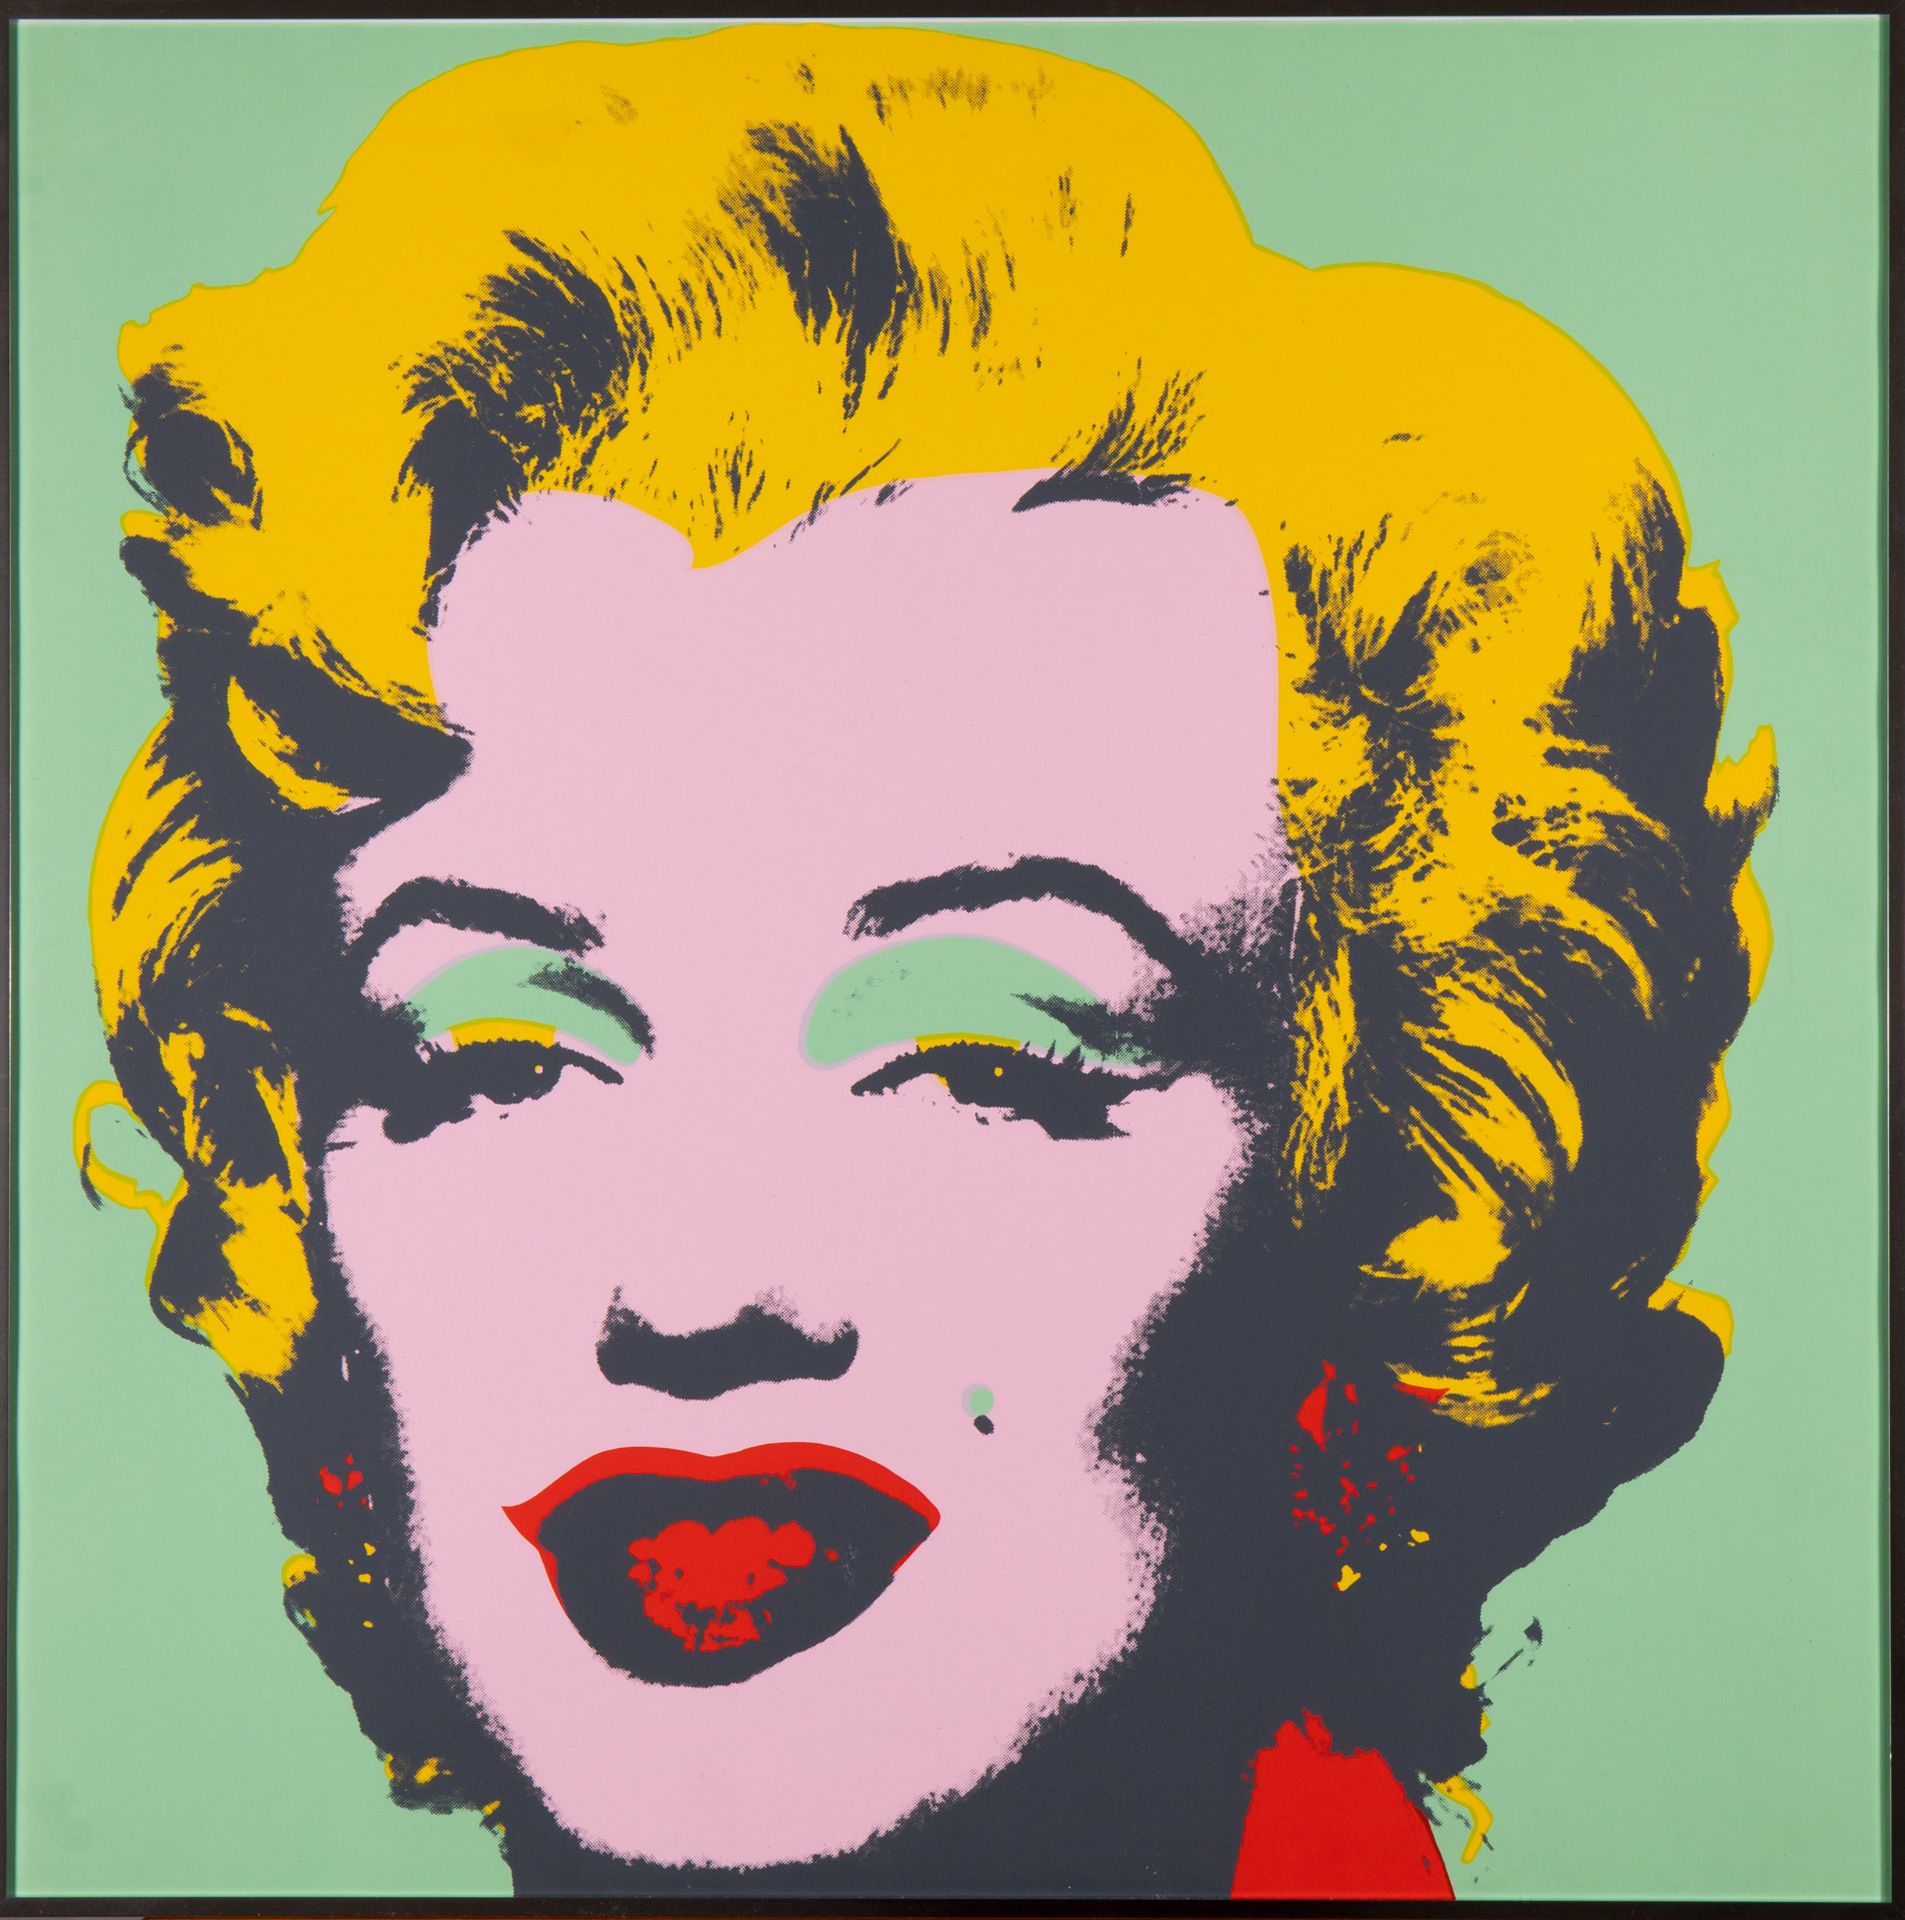 Andy Warhol, Marilyn, 1970 - Image 2 of 7